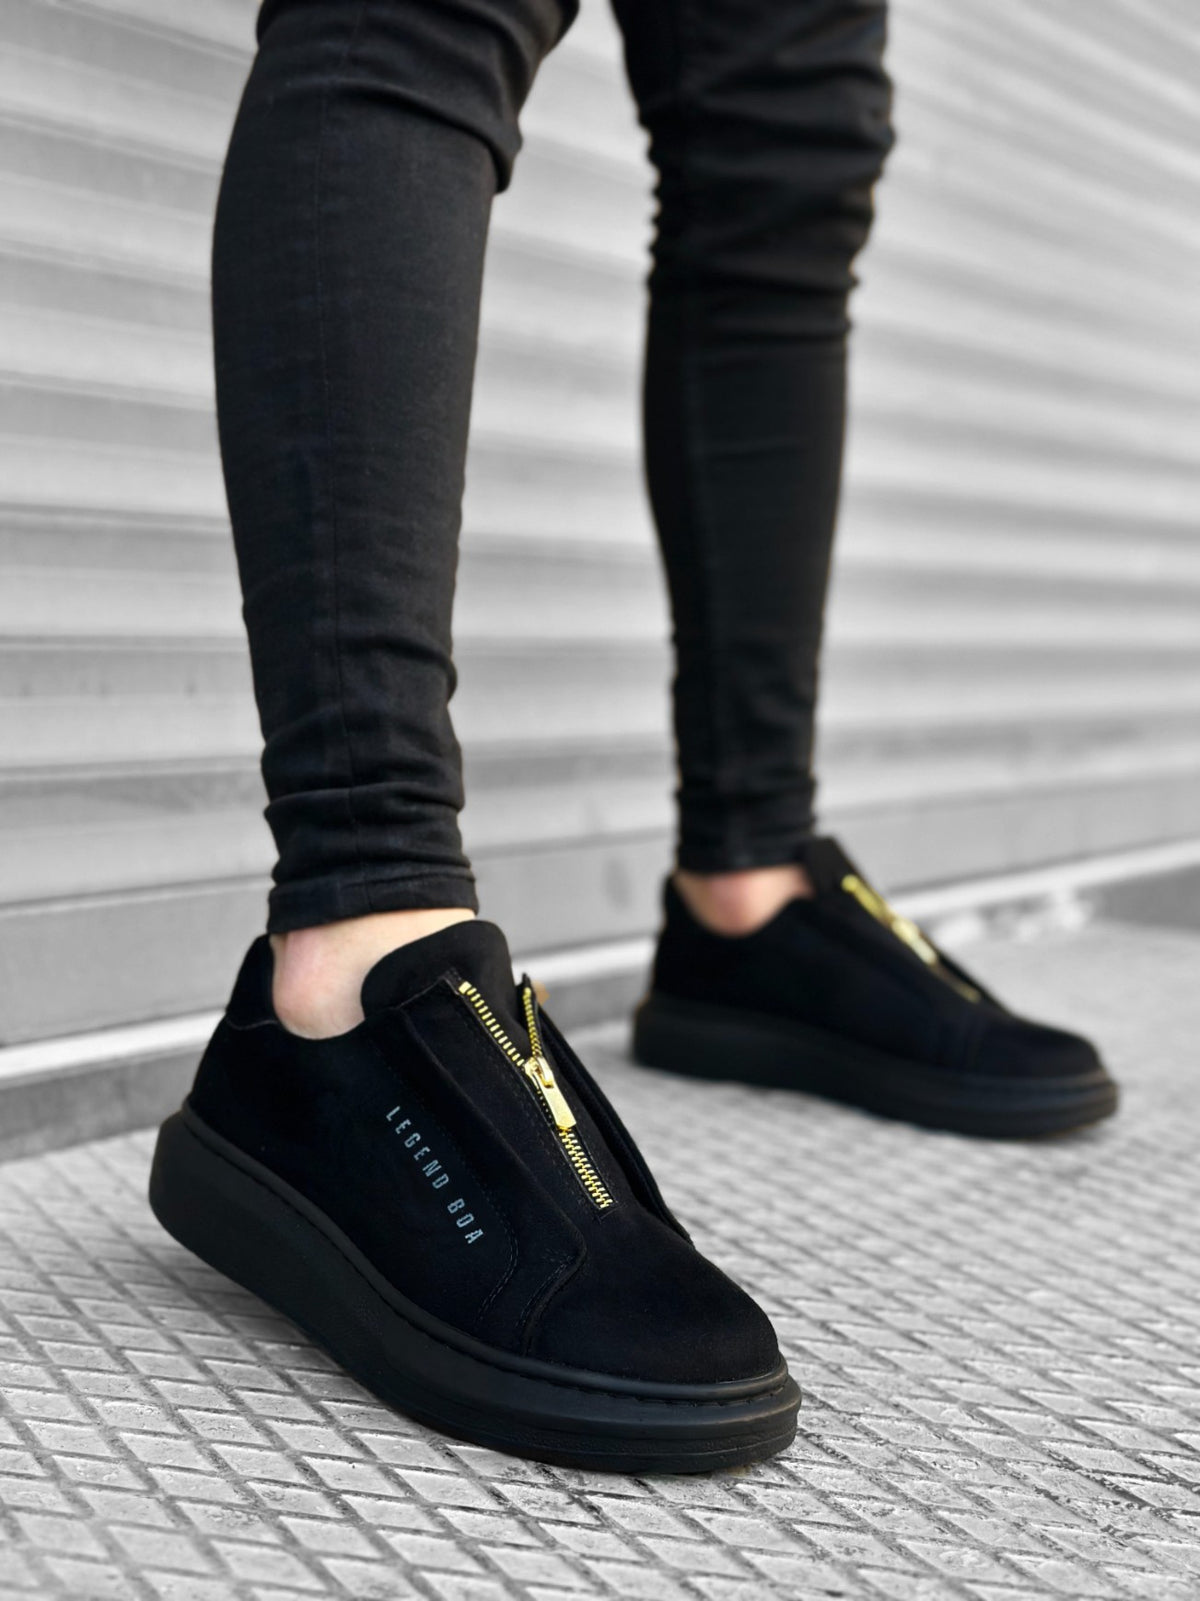 BA0310 BOA Thick Suede High Sole Zipper Black Black Men's Sneakers Shoes - STREETMODE™